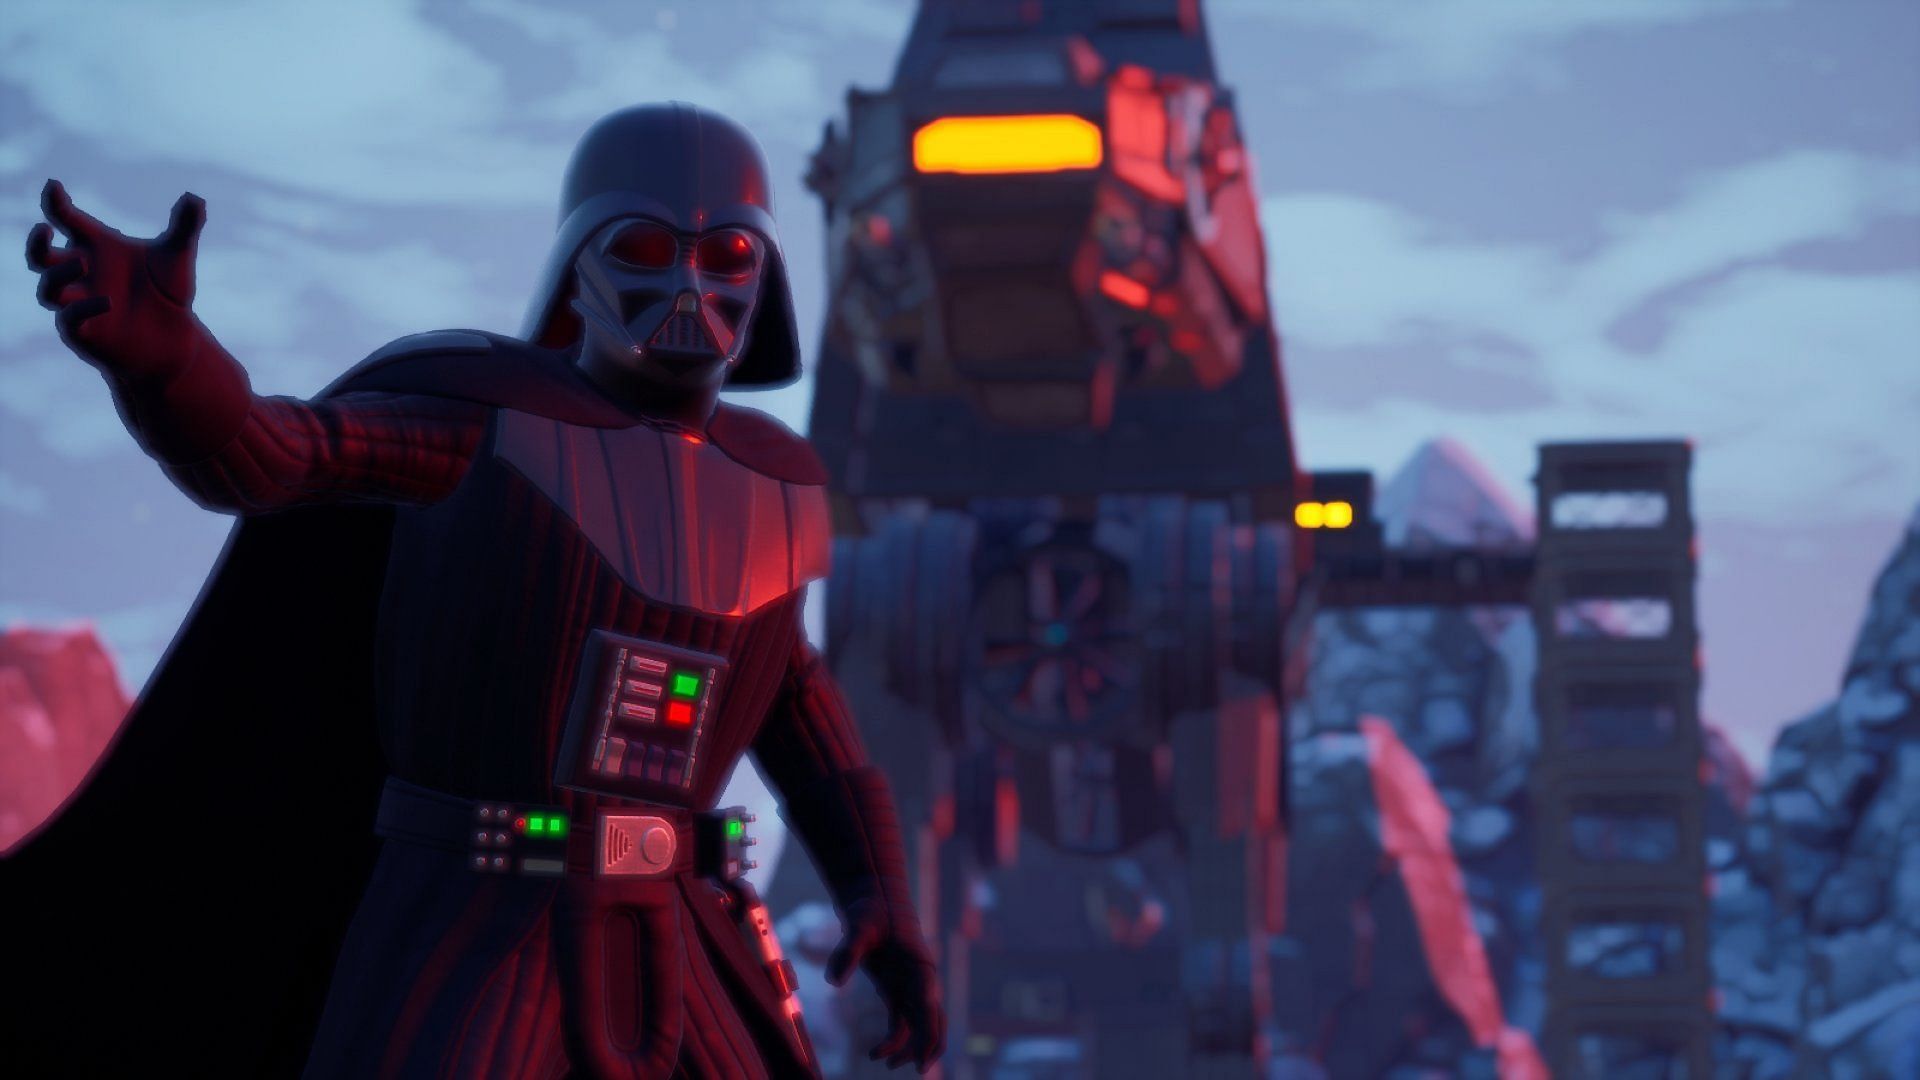 Darth Vader is not a fan of the desert biome in Fortnite Chapter 3 Season 3 (Image via Twitter/okernz_)